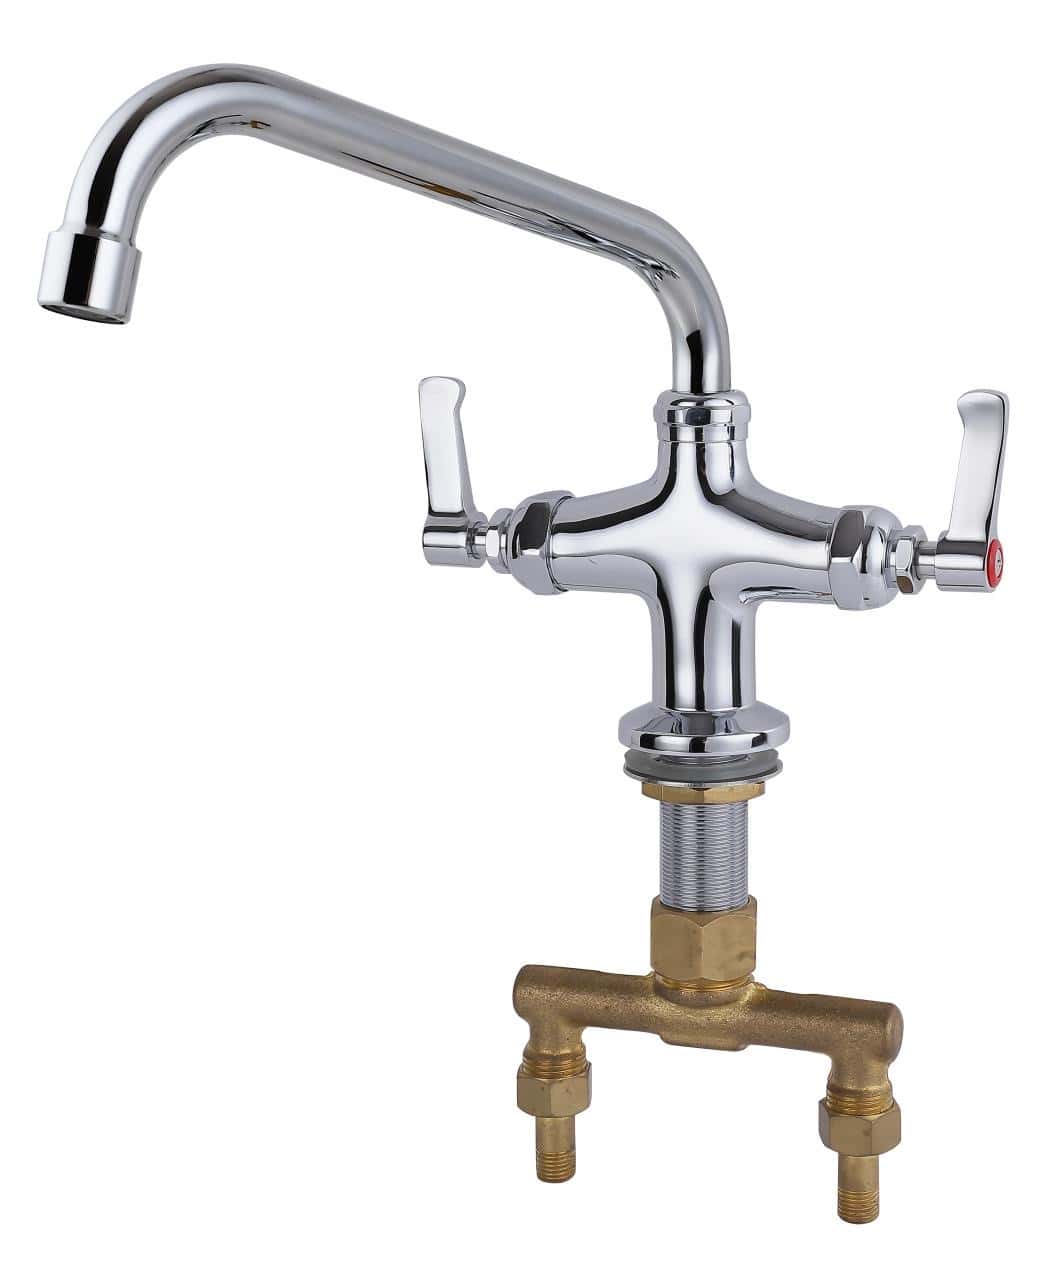 Catering sink tap